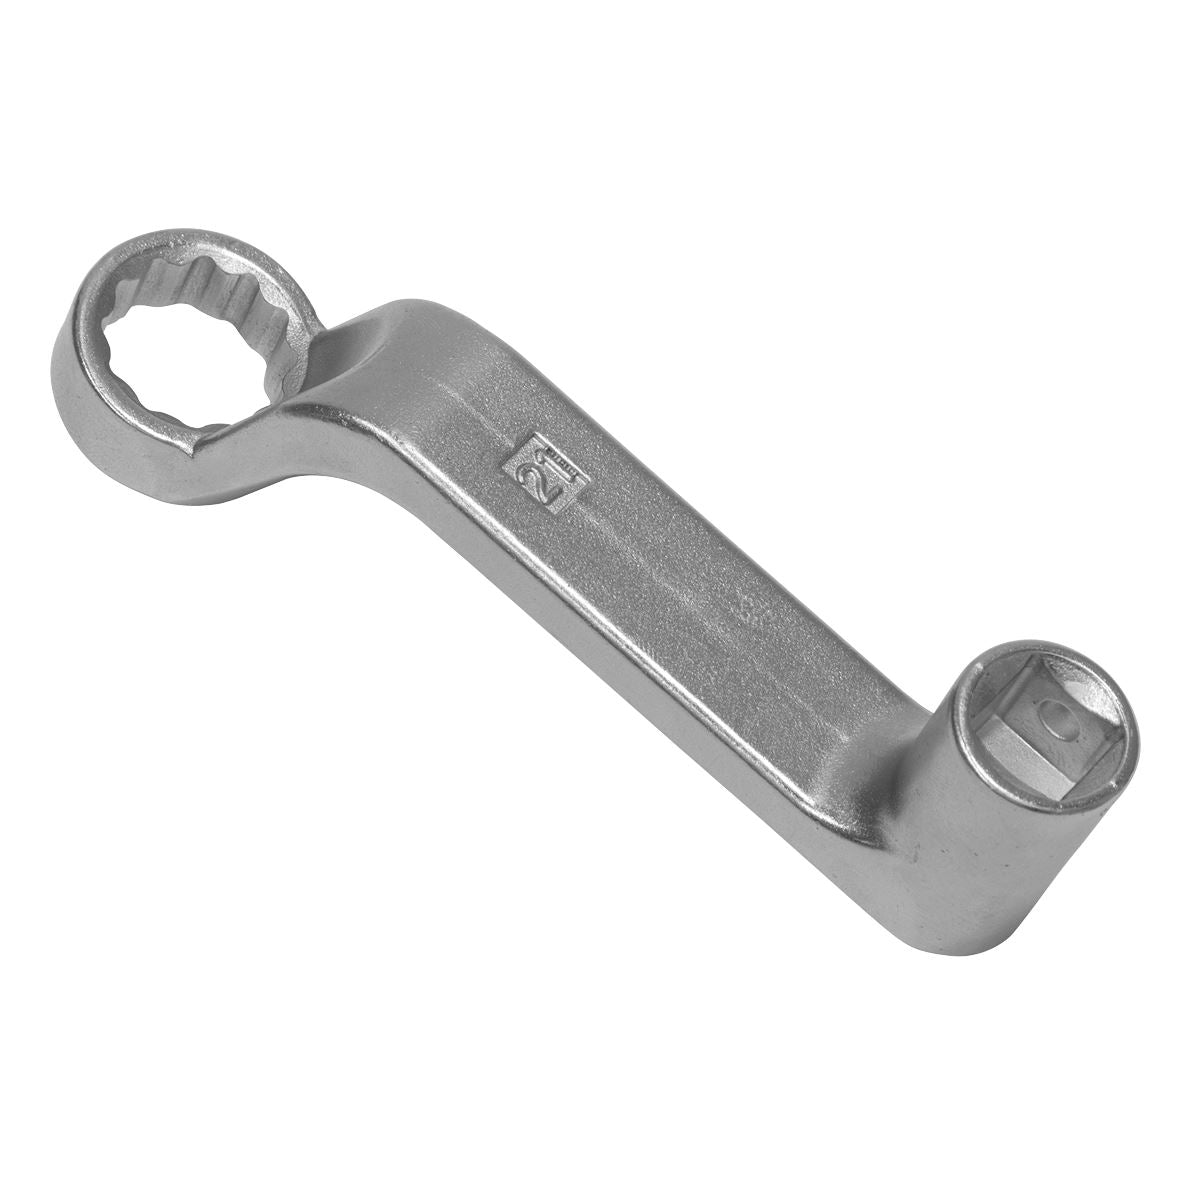 Sealey Camber Adjustment Spanner 21mm x 1/2"Sq Drive - Mercedes/VW